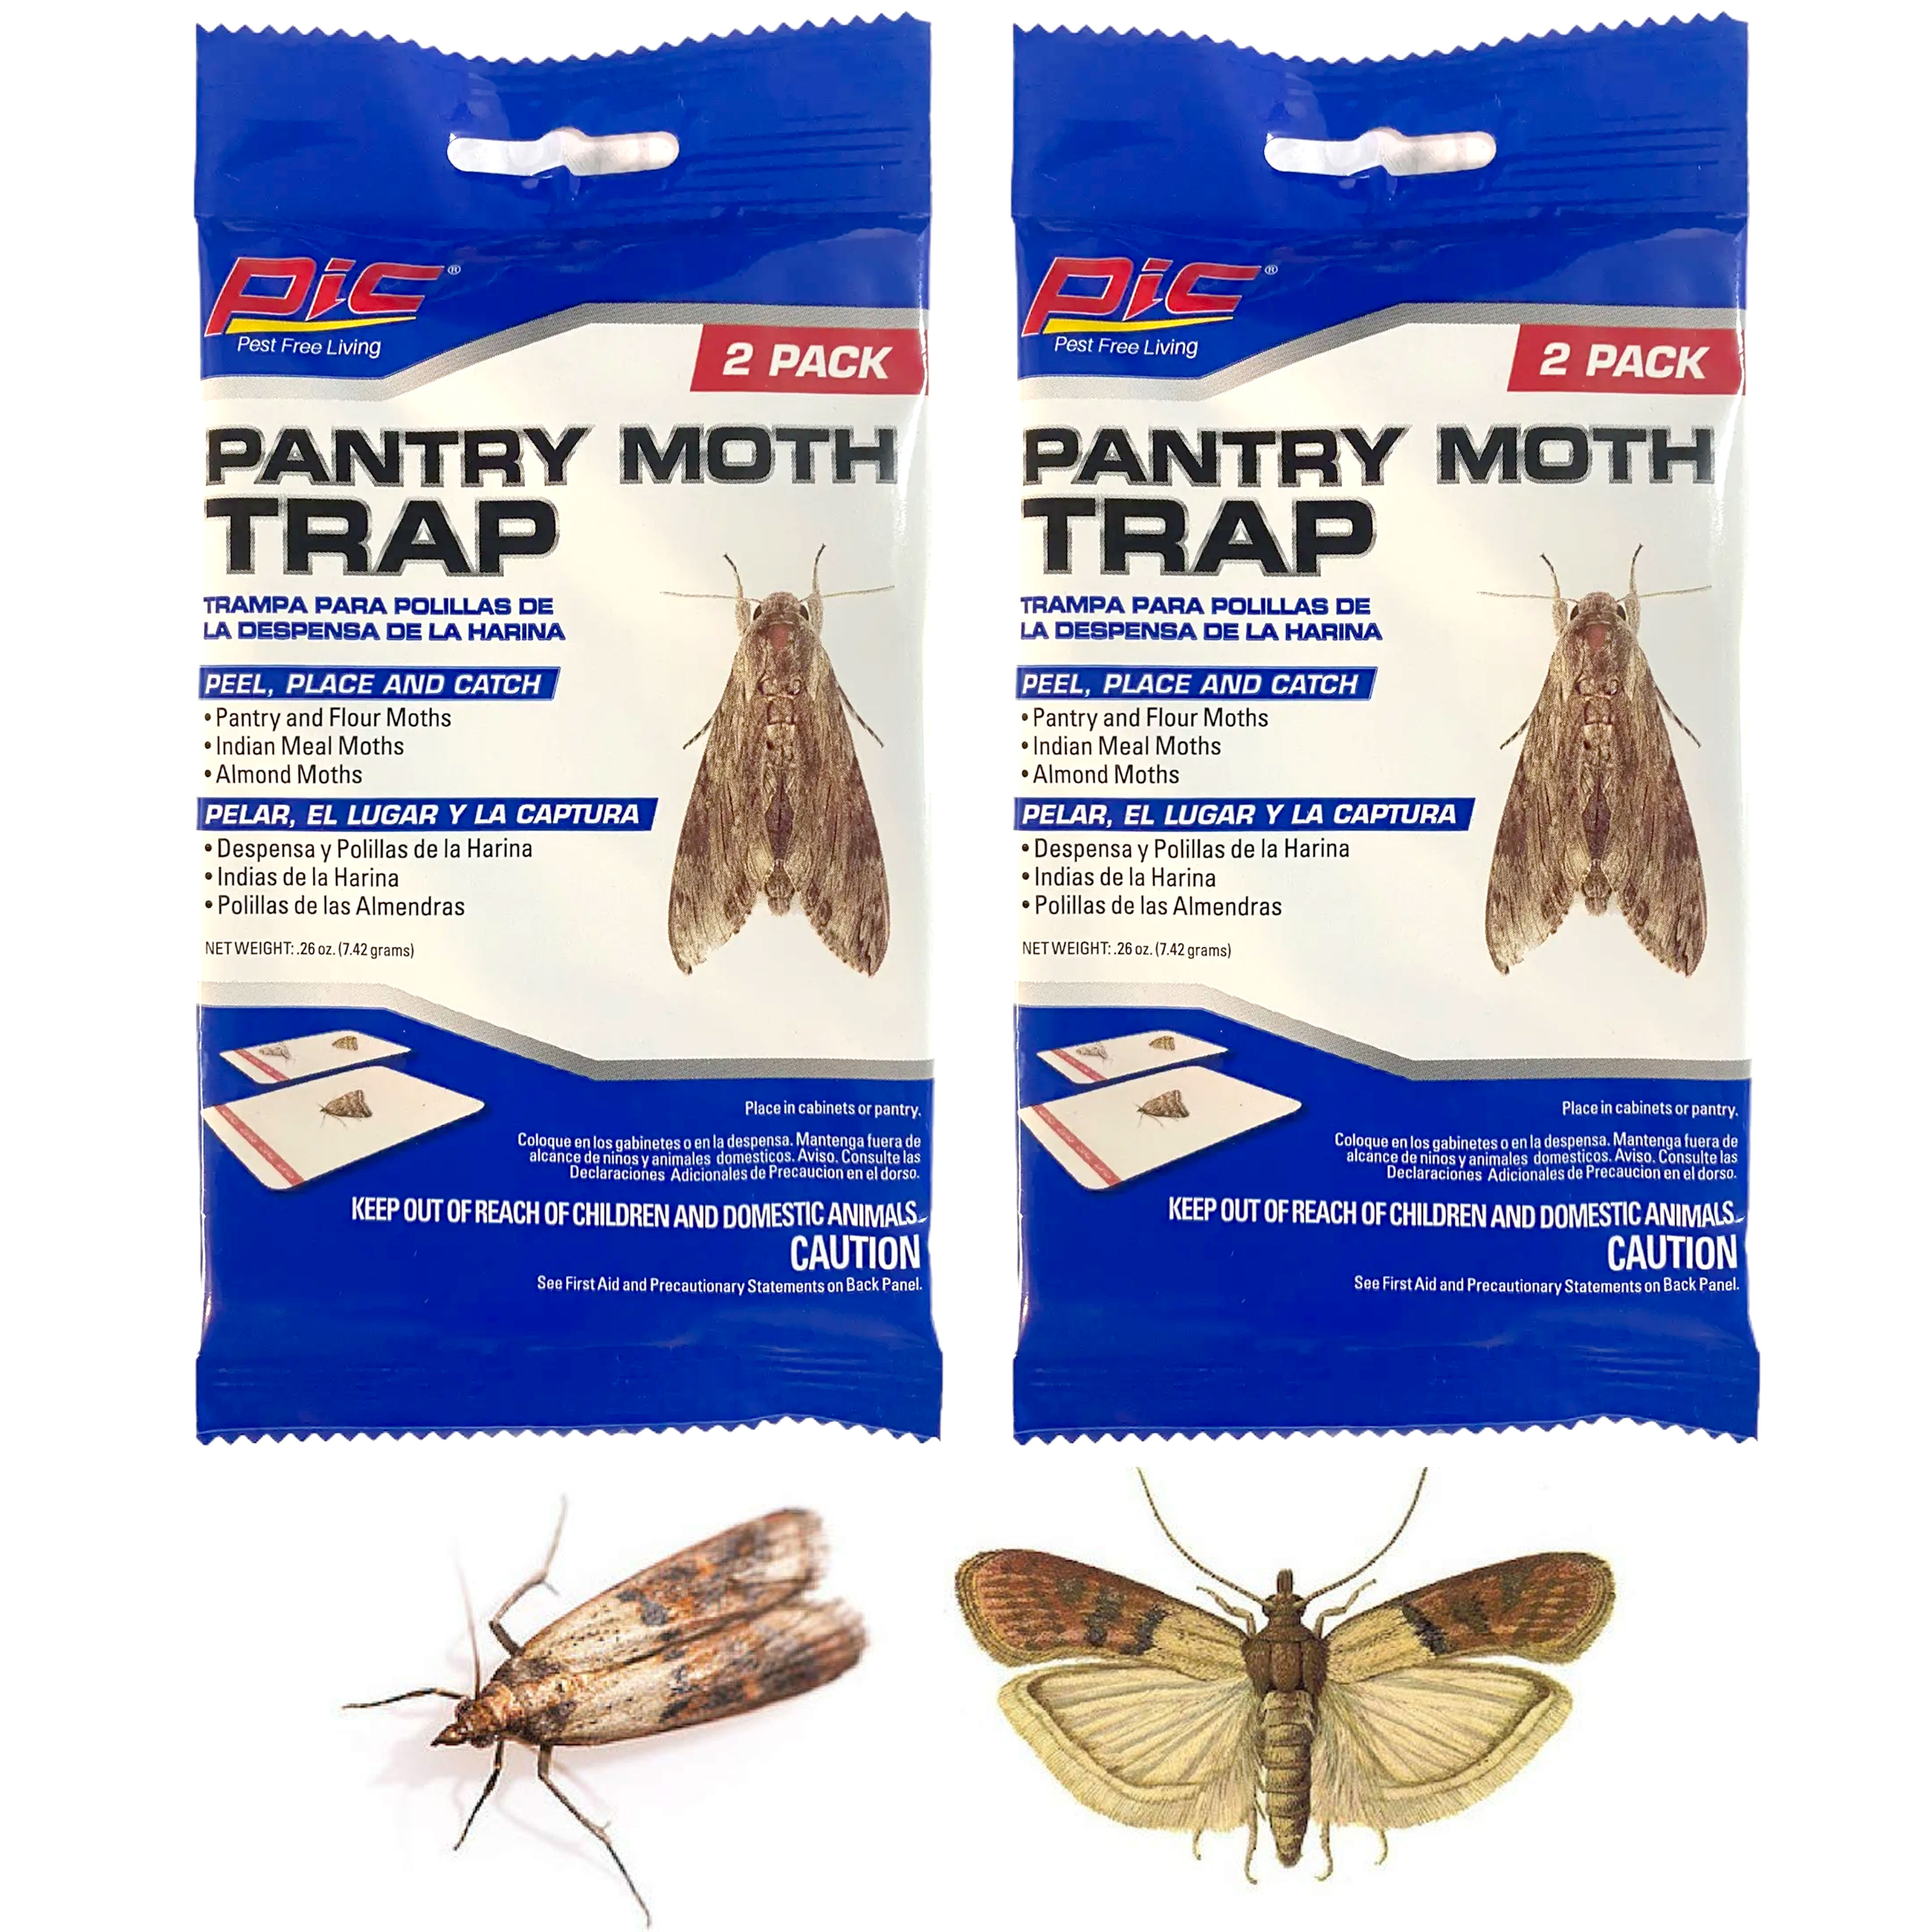 Catcher Labs Pantry & Clothing Moth Traps